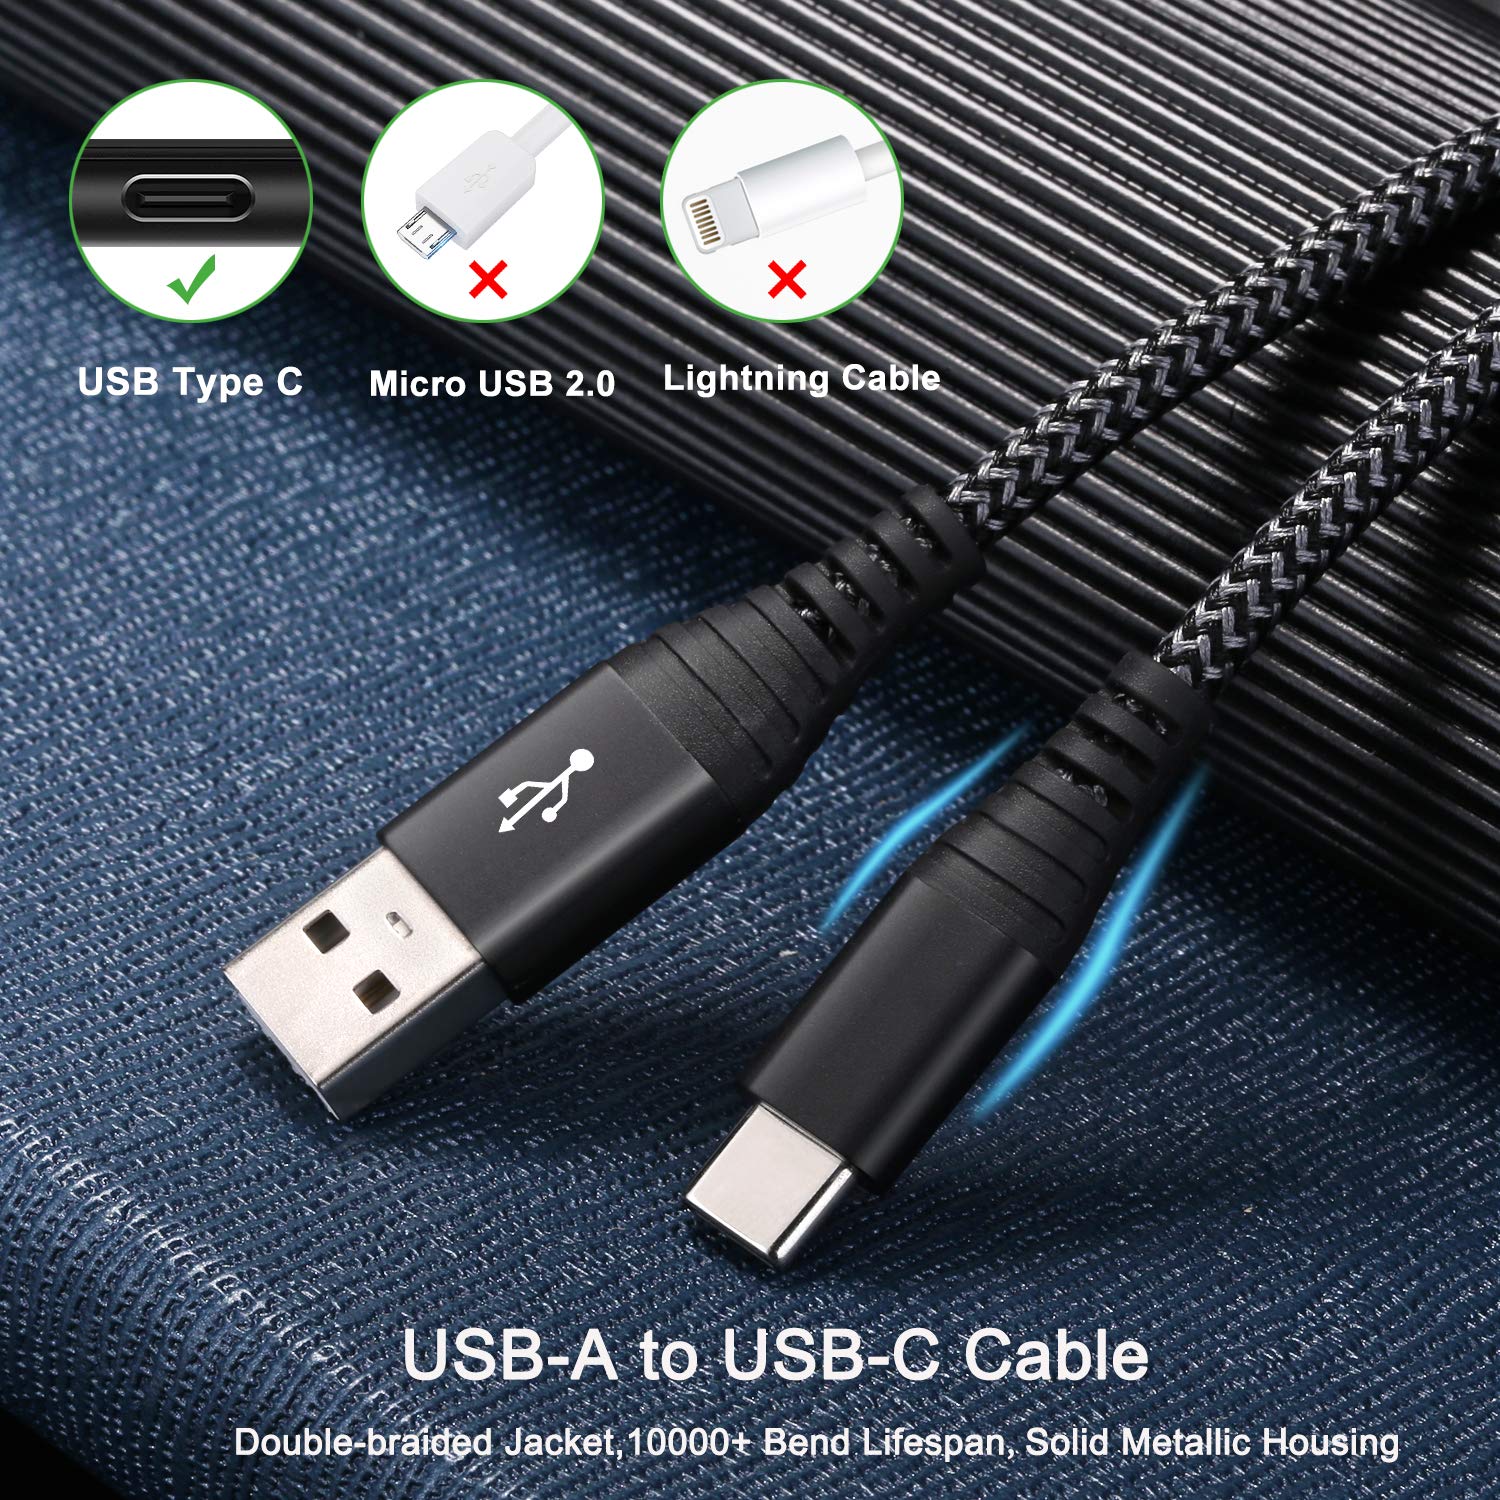 Besgoods USB Type C Charger Cable: Fast Charging and Durability in Vibrant Colors